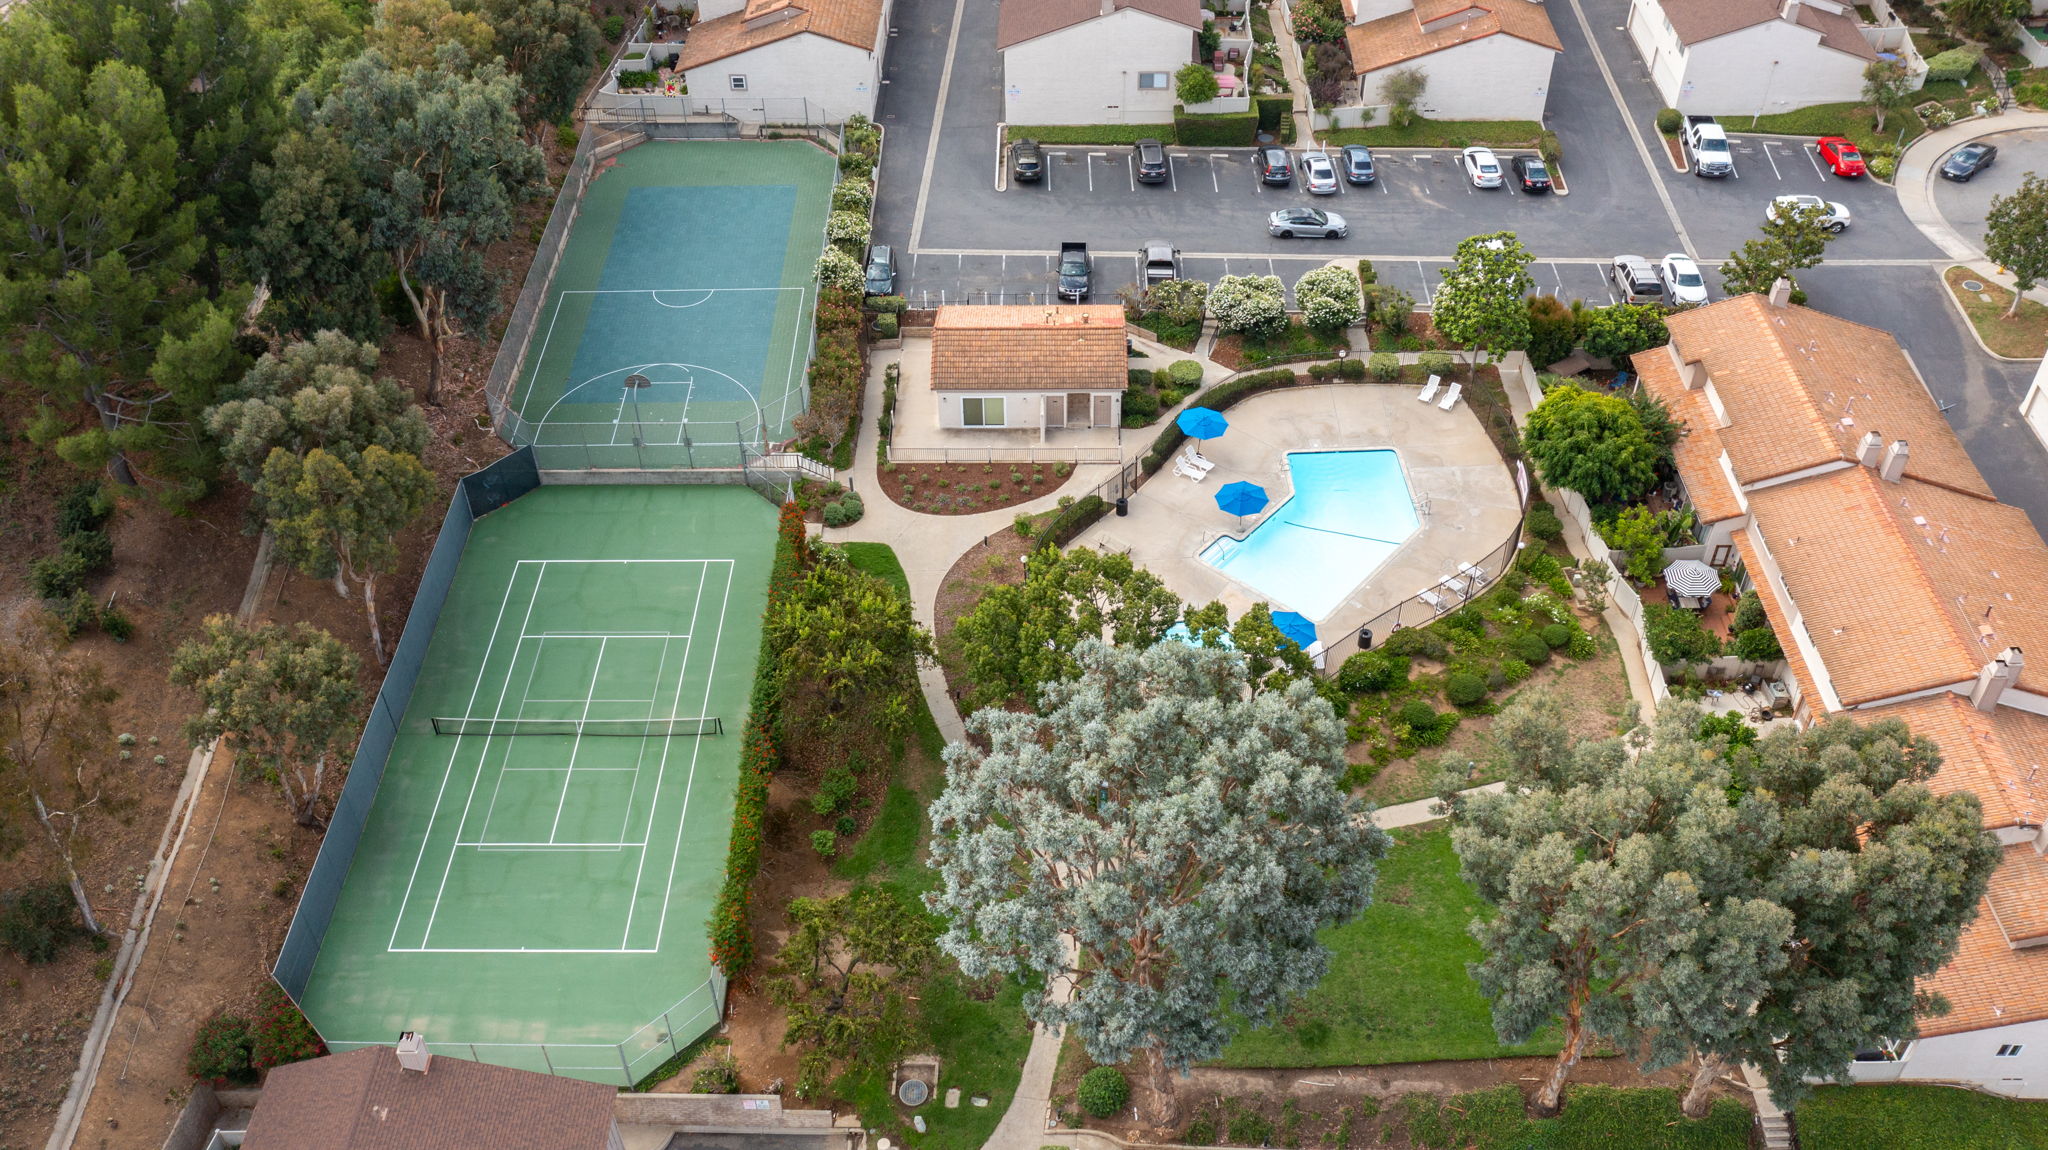 Aerial view of community's main pool/spa area, clubhouse, tennis court, basketball/sport court